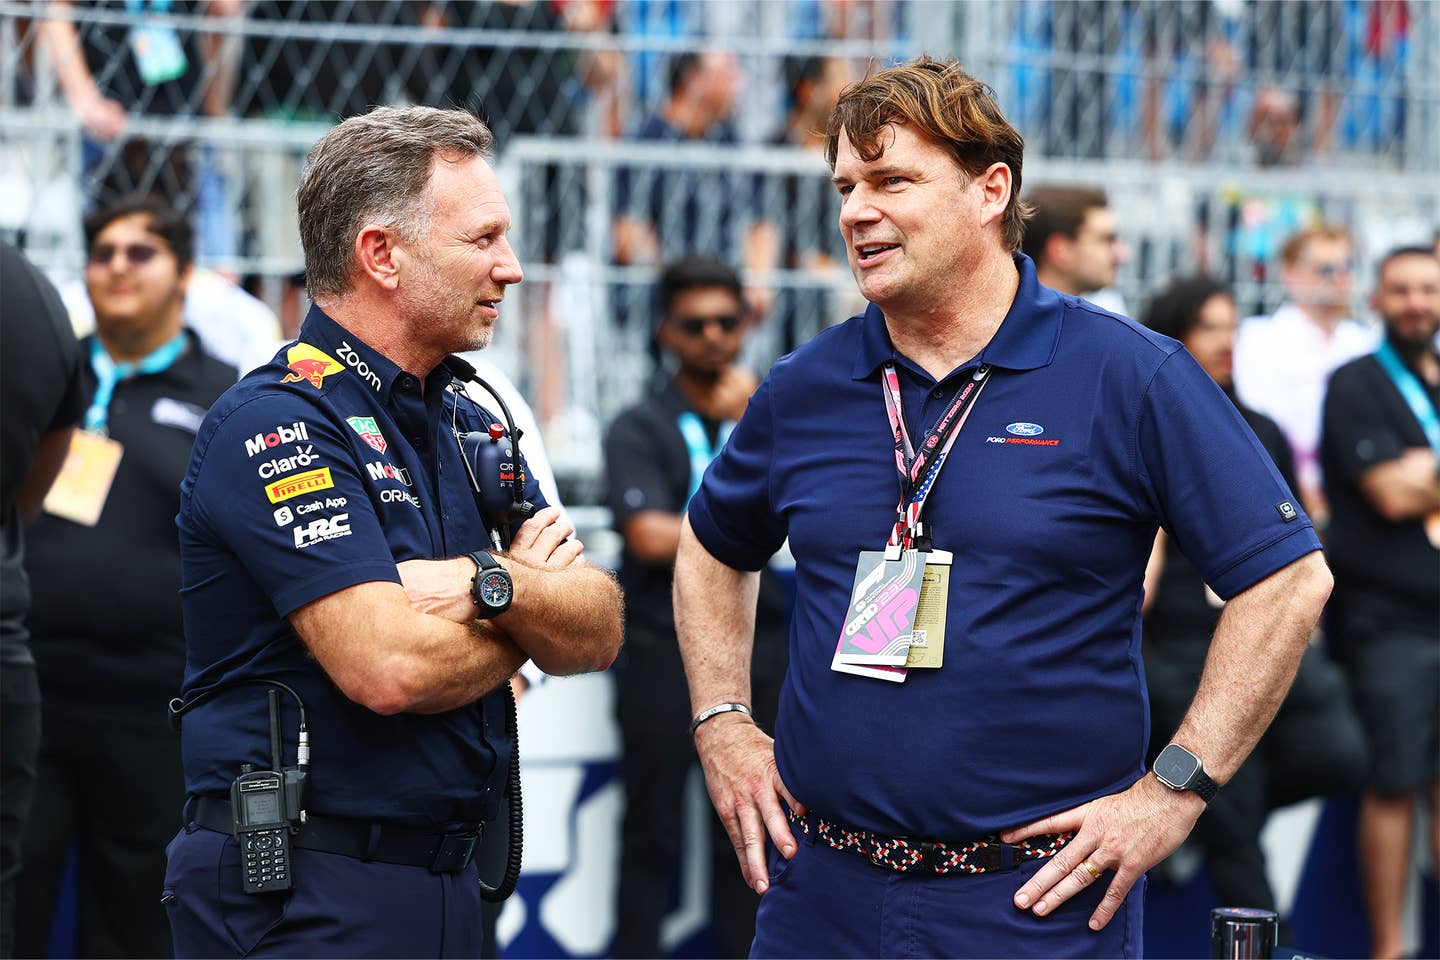 Jim Farley, at right, chats with Red Bull F1 team principal Christian Horner.